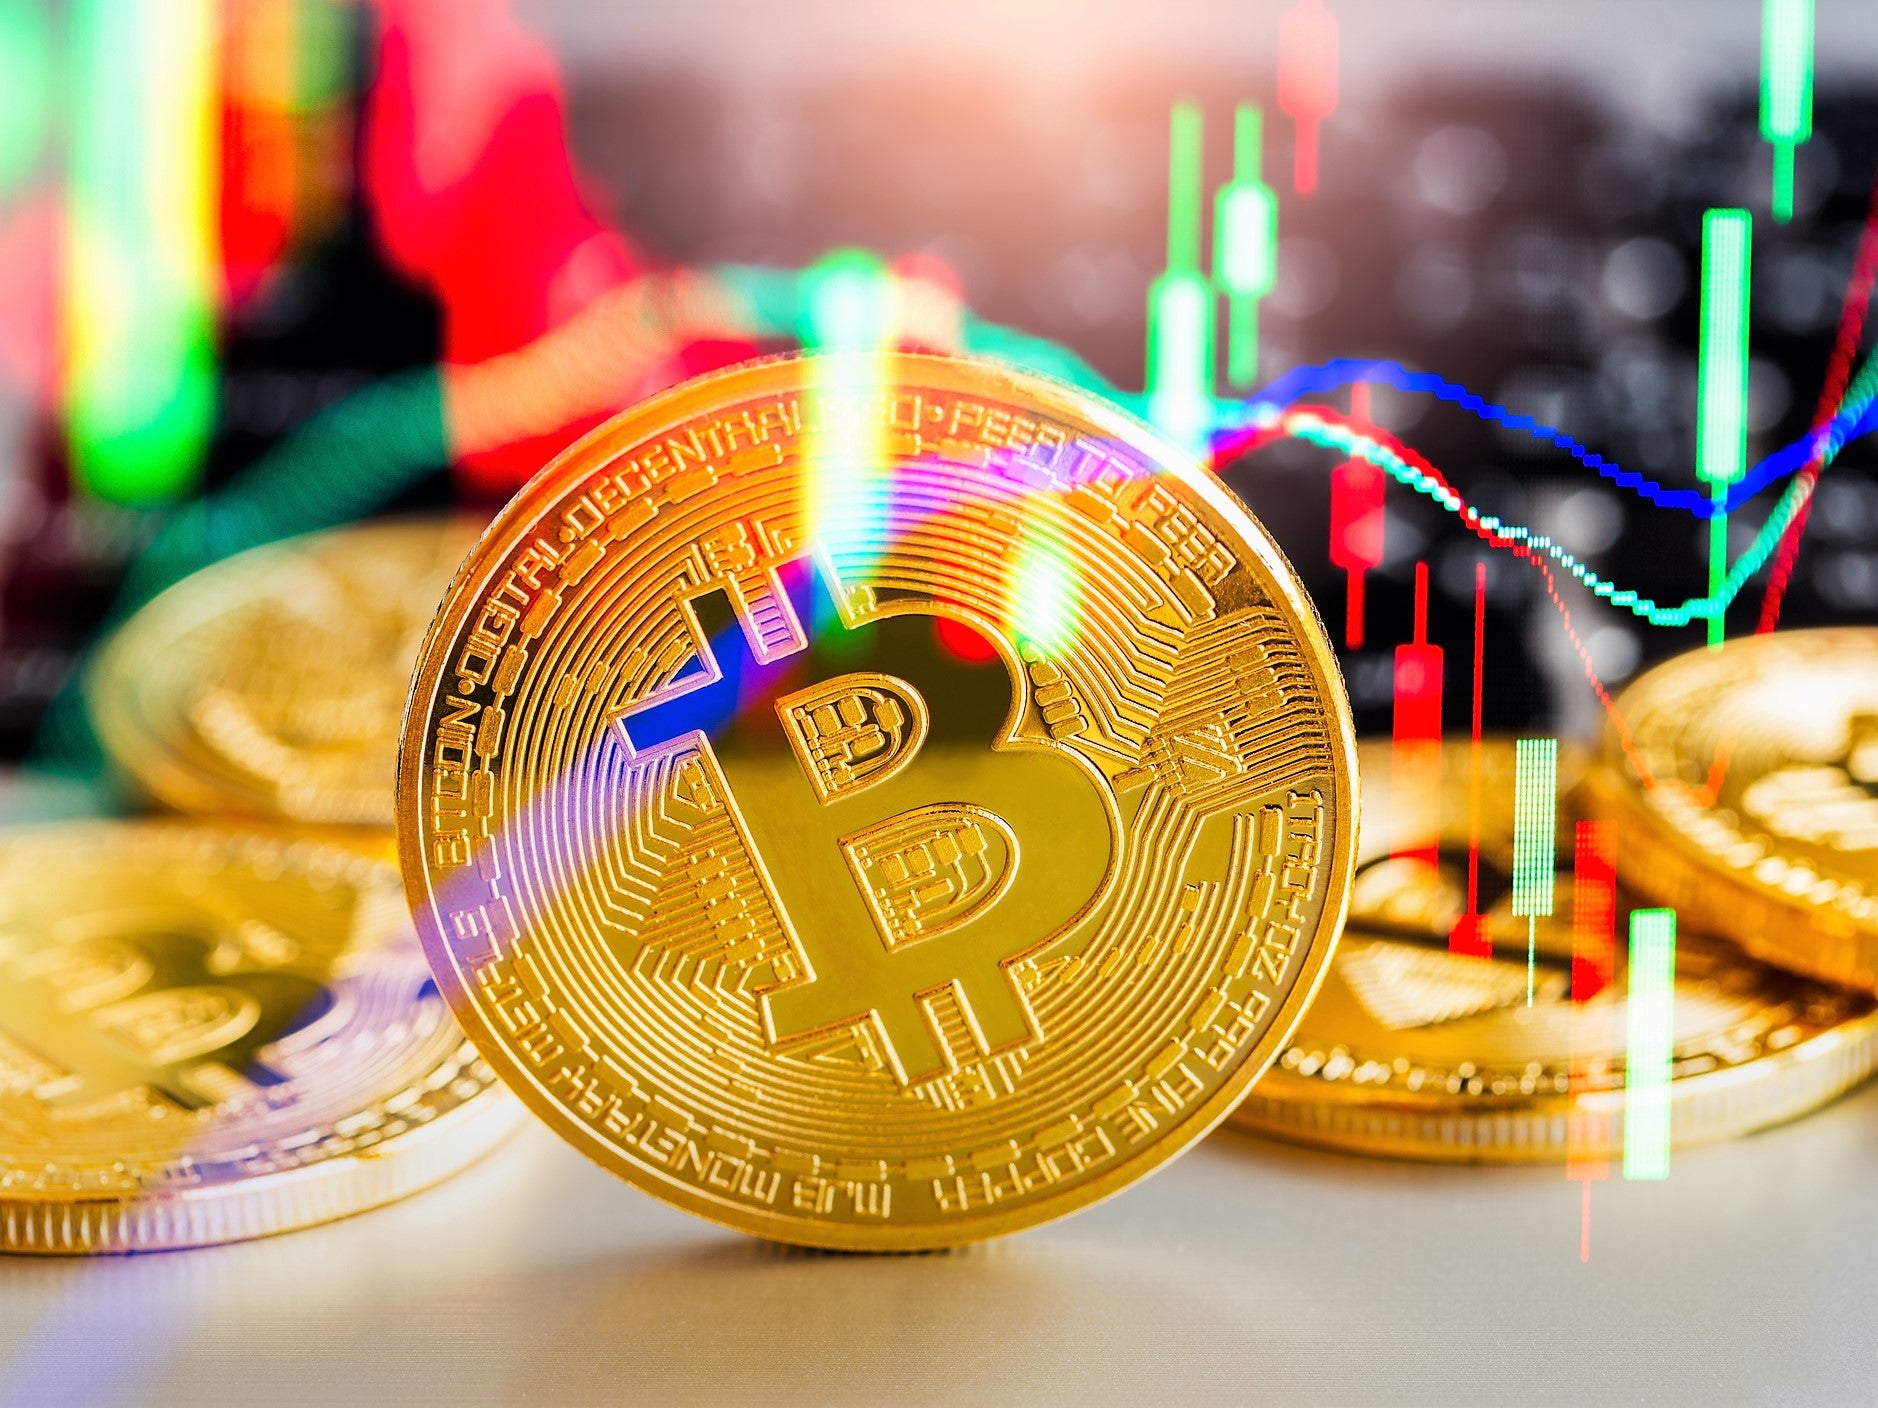 Bitcoin has led a market-wide crypto collapse in June 2022